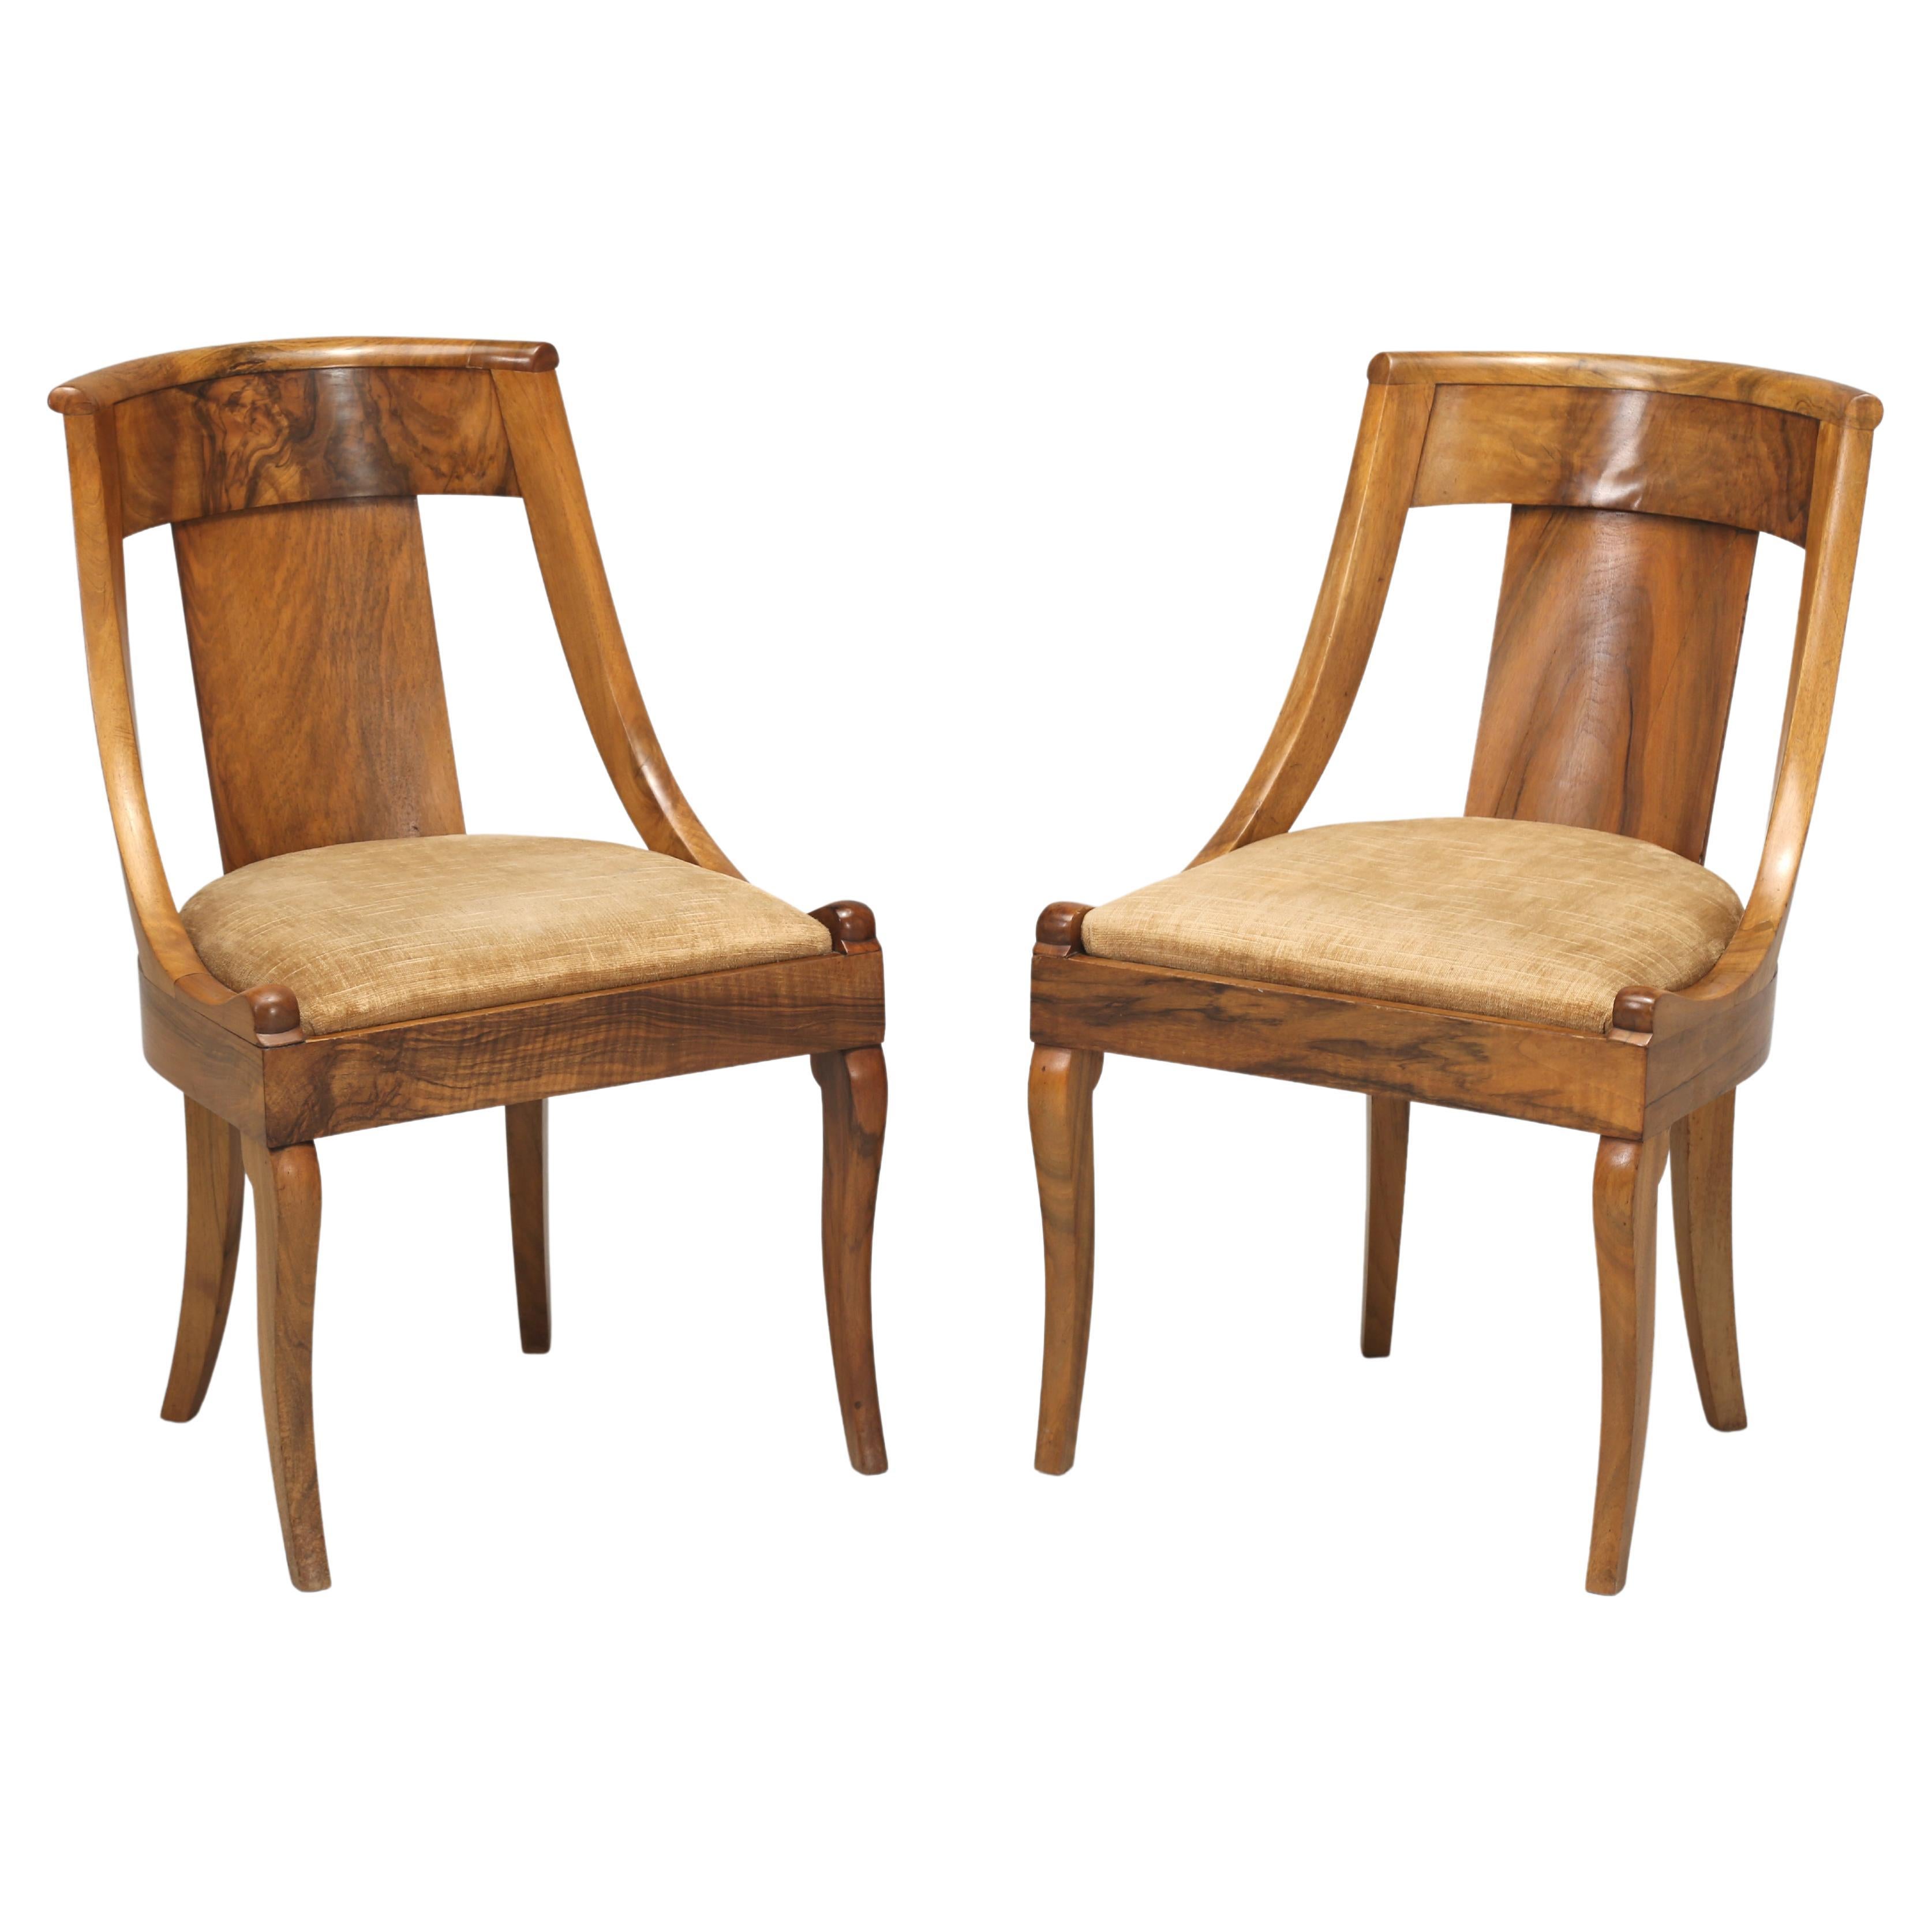 Antique French Empire Style Walnut Barrel-Back Chairs Restored in France